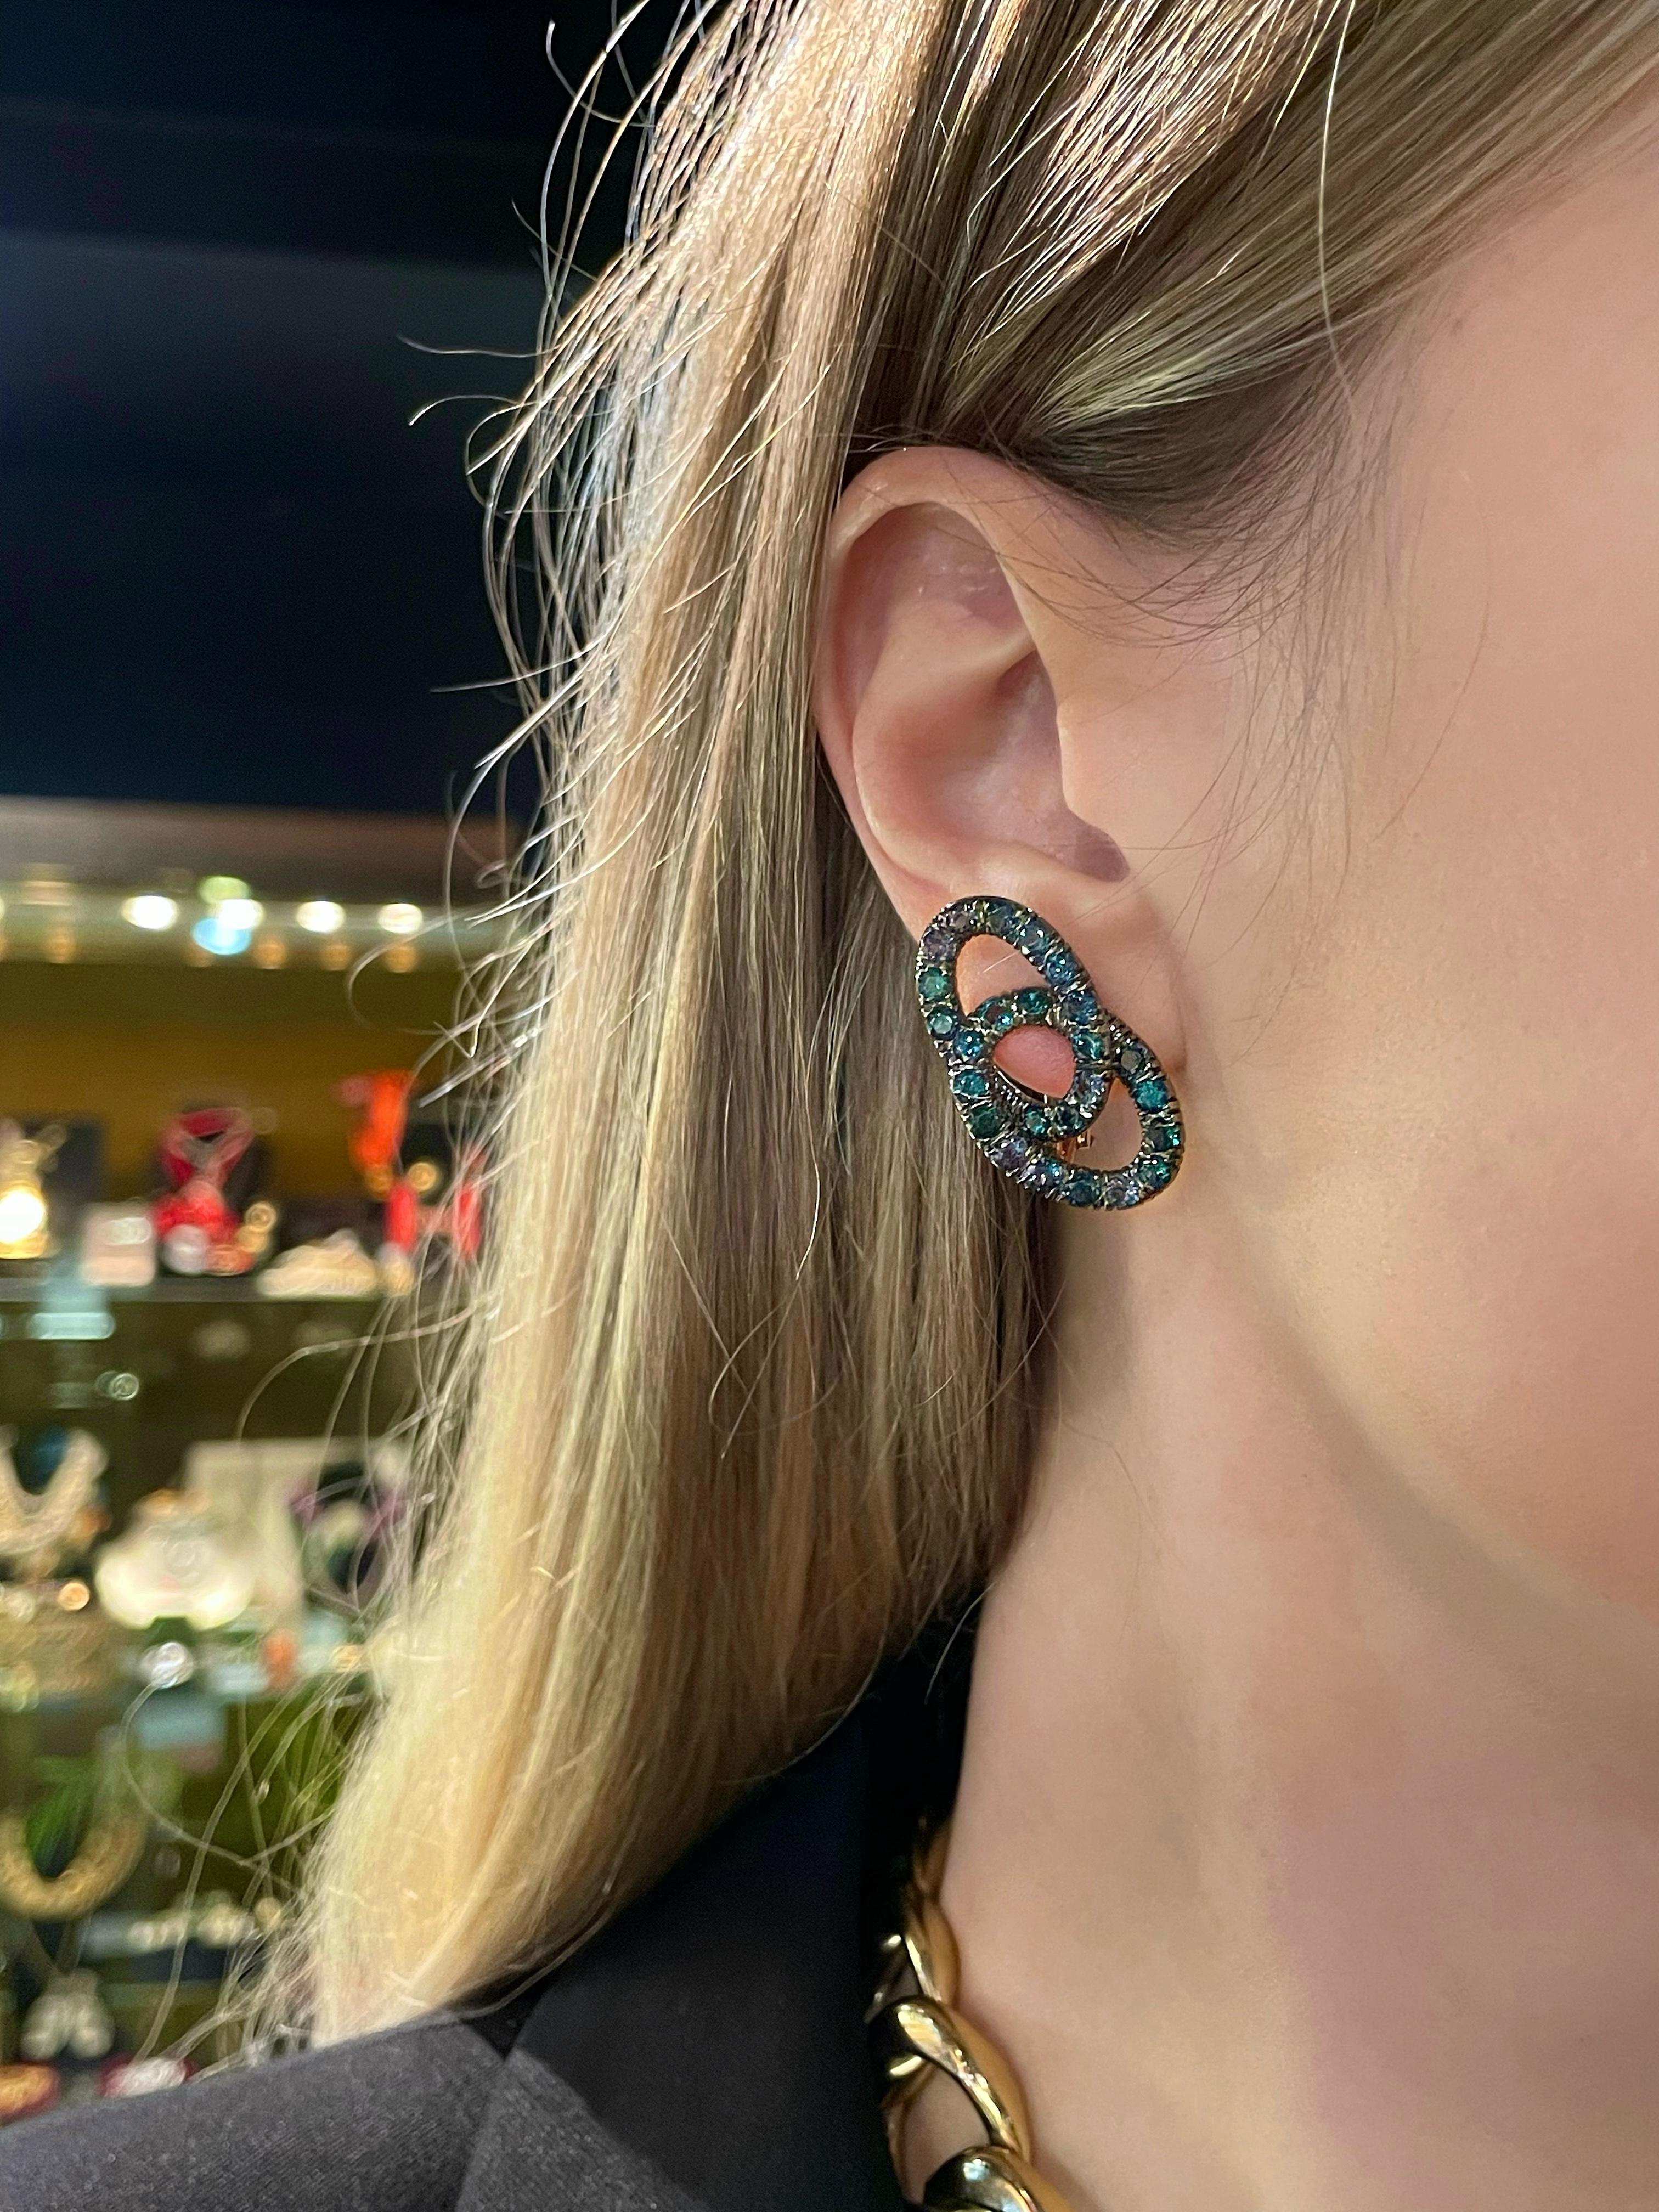 This is a stunning pair of Pomellato “Catene” collection French back earrings. The piece is crafted in 18K gold. It is set with a fabulous green blue colour garnets.  

Signed: “Pomellato”

Weight: 15.96g
Size: 3x1.5cm

———

If you have any